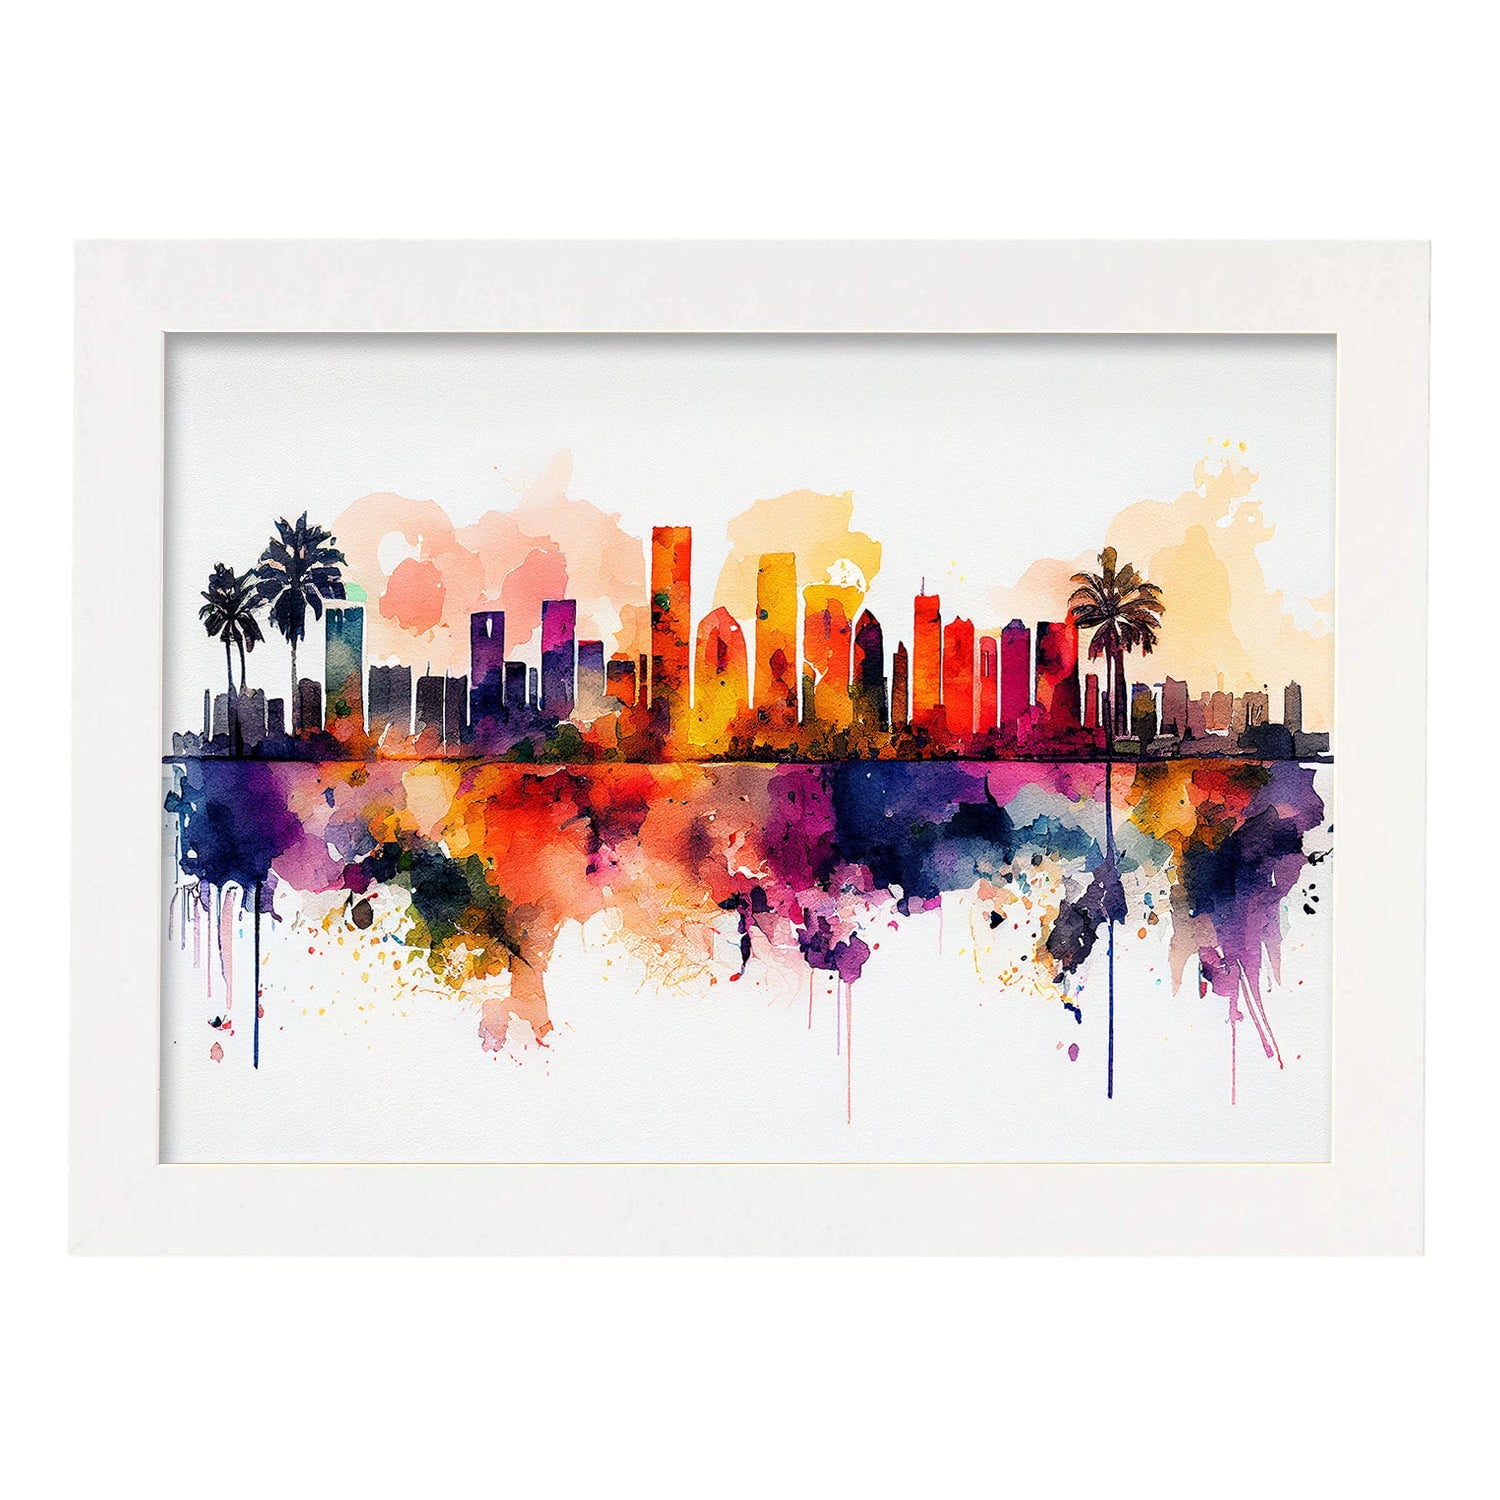 Nacnic watercolor of a skyline of the city of Miami_1. Aesthetic Wall Art Prints for Bedroom or Living Room Design.-Artwork-Nacnic-A4-Marco Blanco-Nacnic Estudio SL